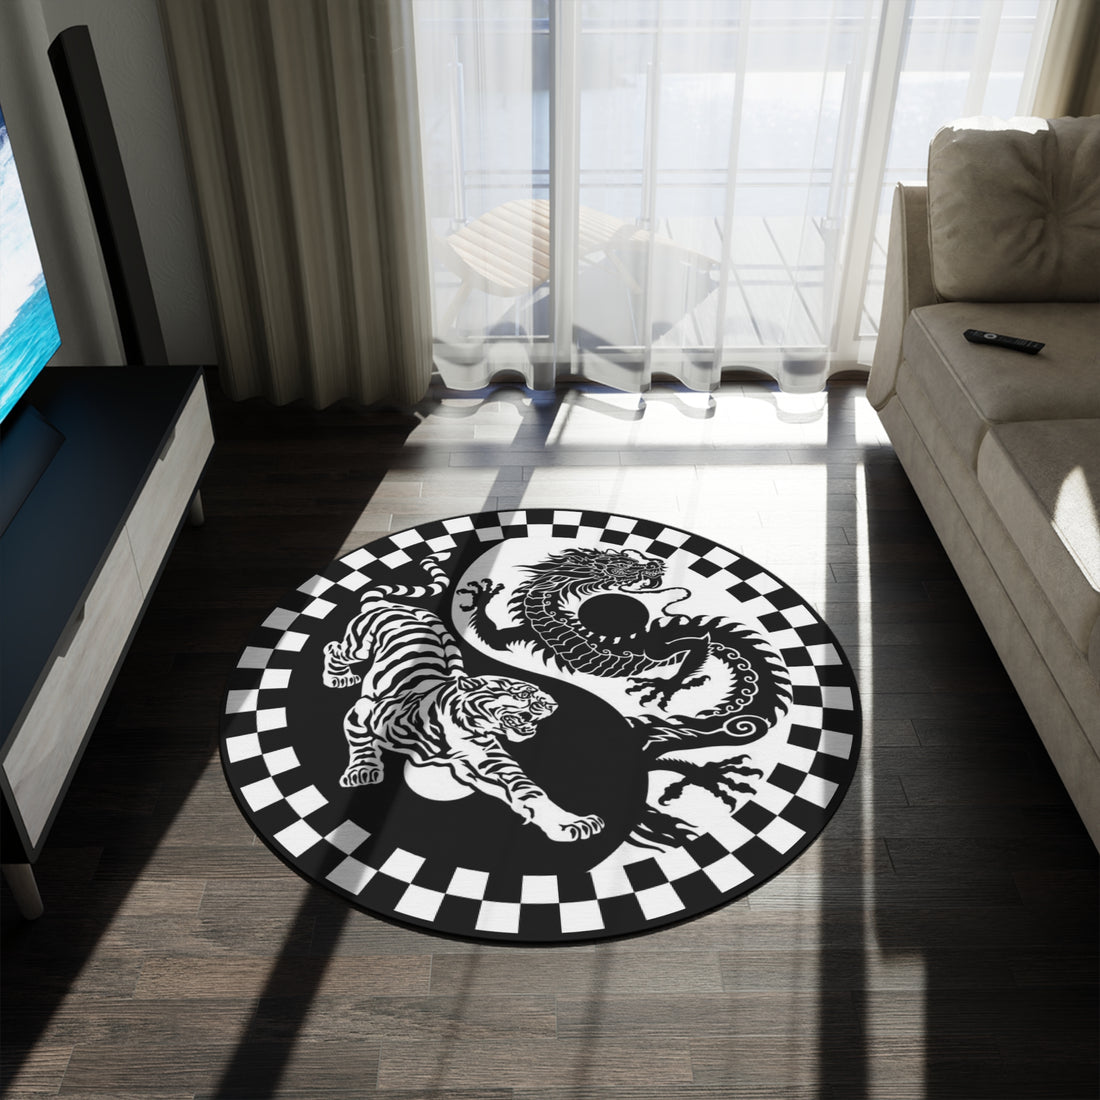 Round Rug Tiger and Dragon black and white